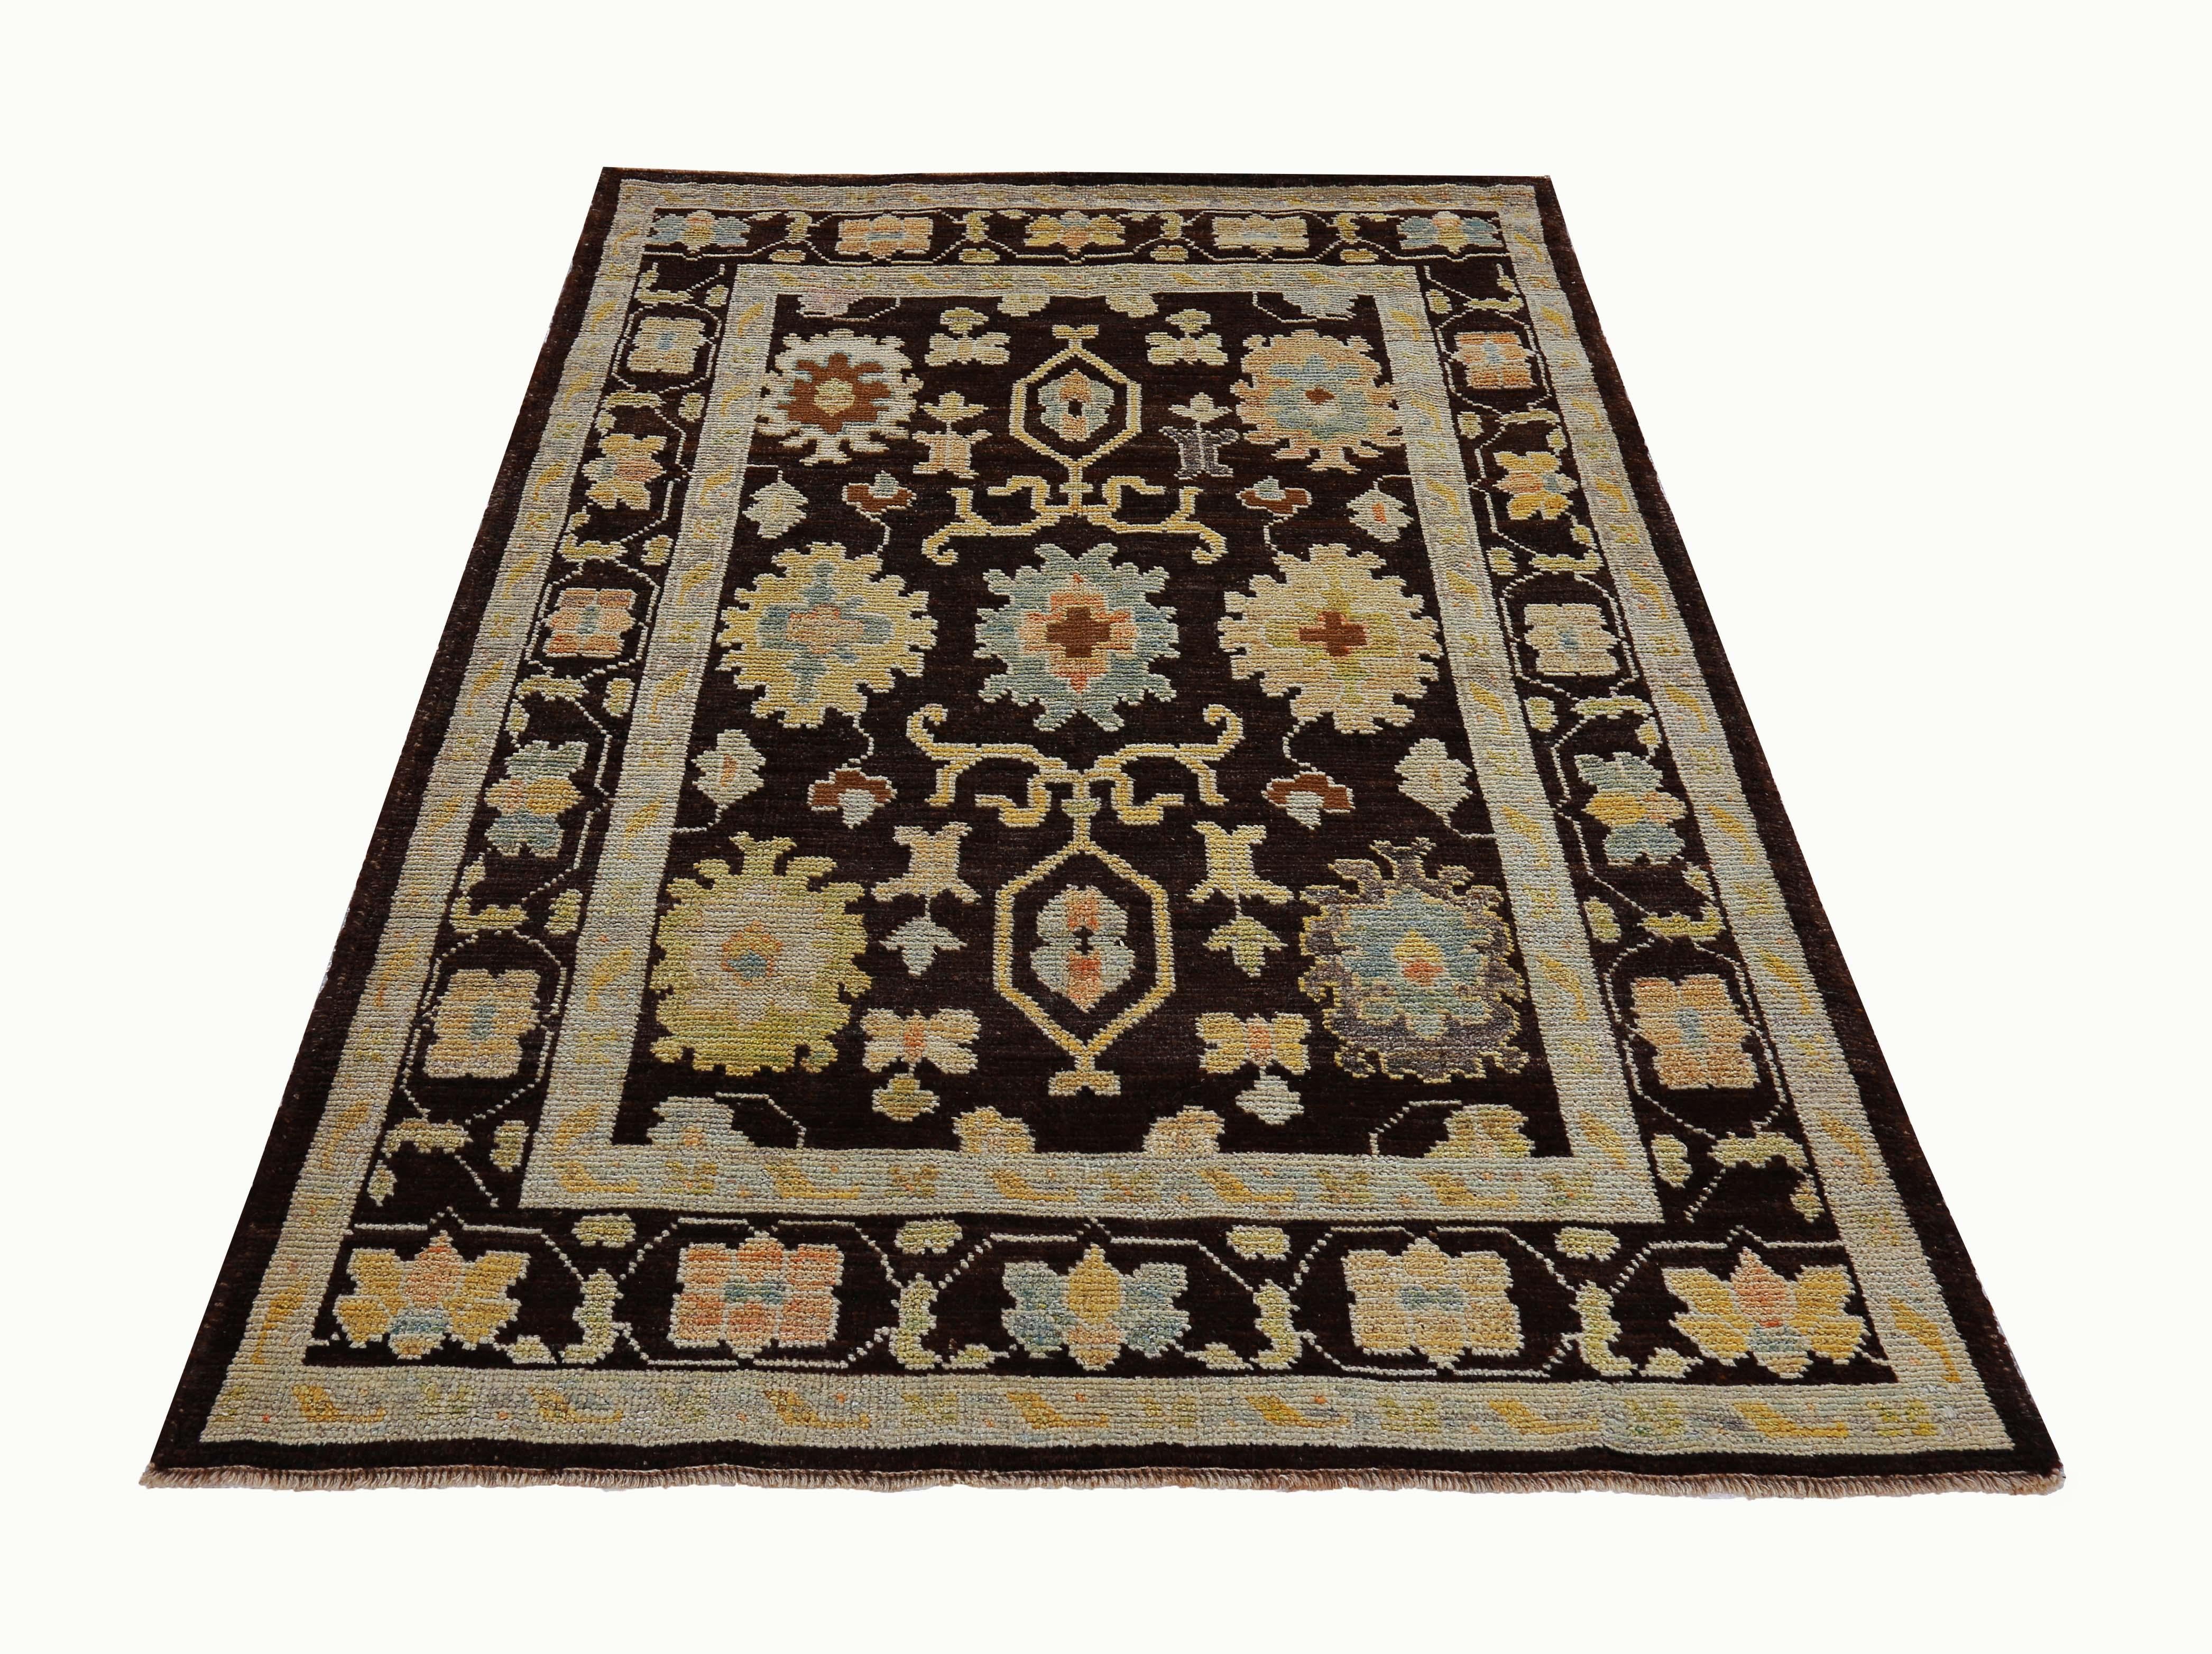 New Turkish rug made of handwoven sheep’s wool of the finest quality. It’s colored with organic vegetable dyes that are certified safe for humans and pets alike. It features floral details in blue, yellow and green over a brown field. Flower